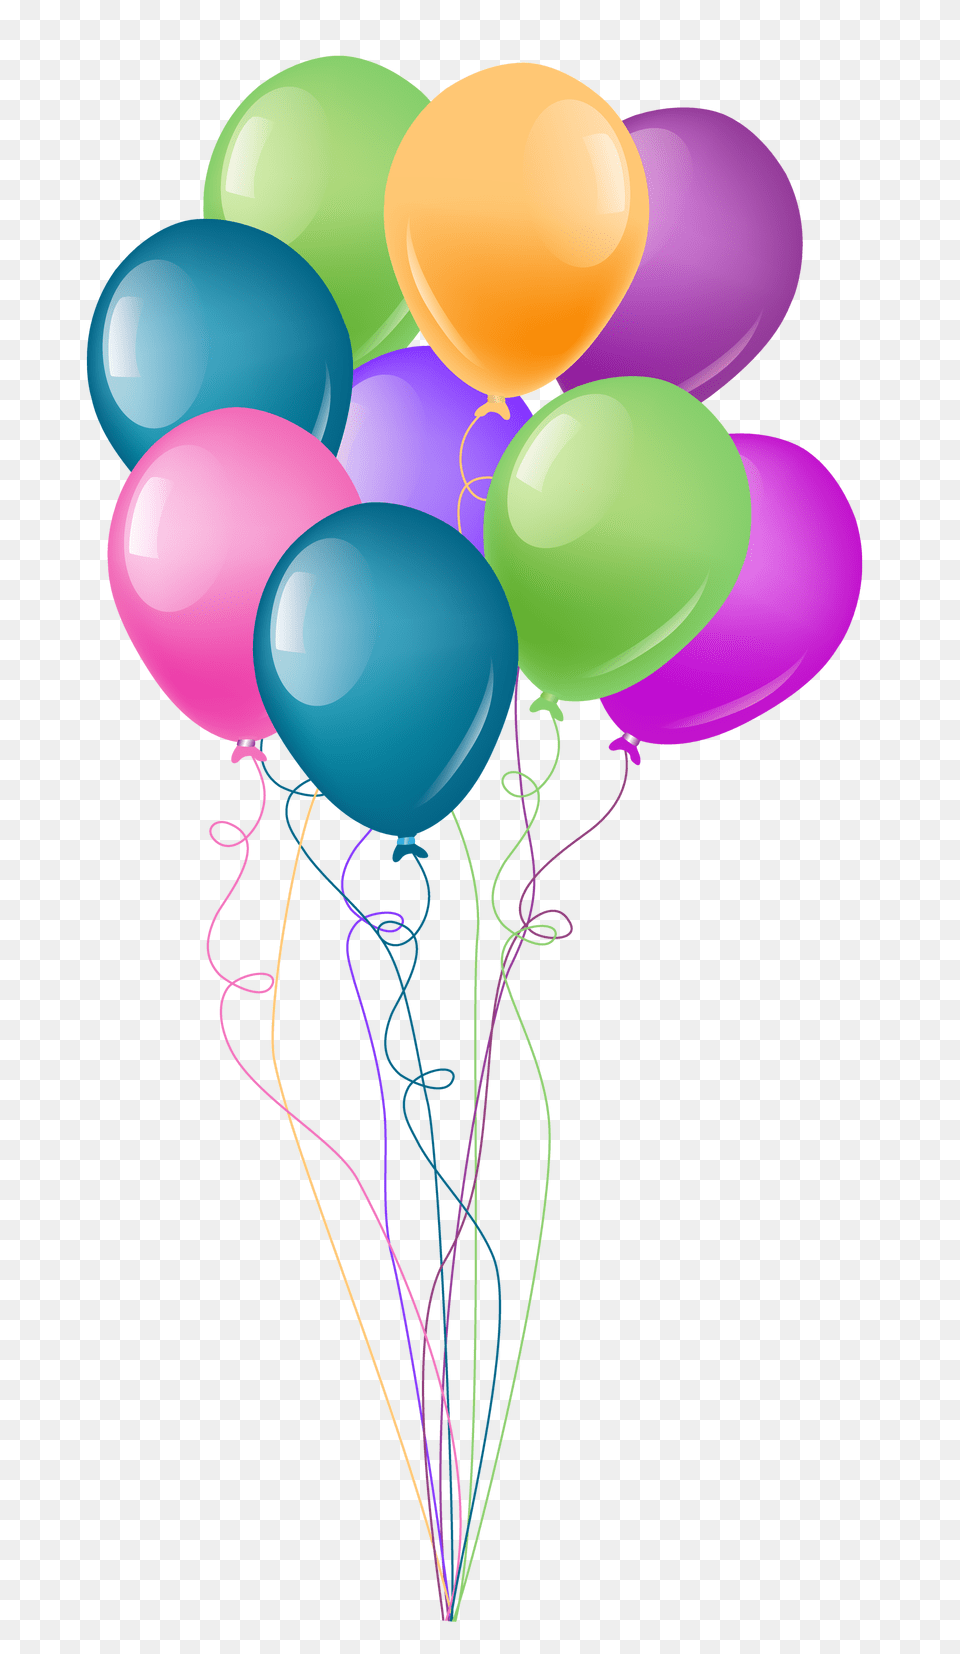 Balloon Hd Balloon Hd Images Free Transparent Png